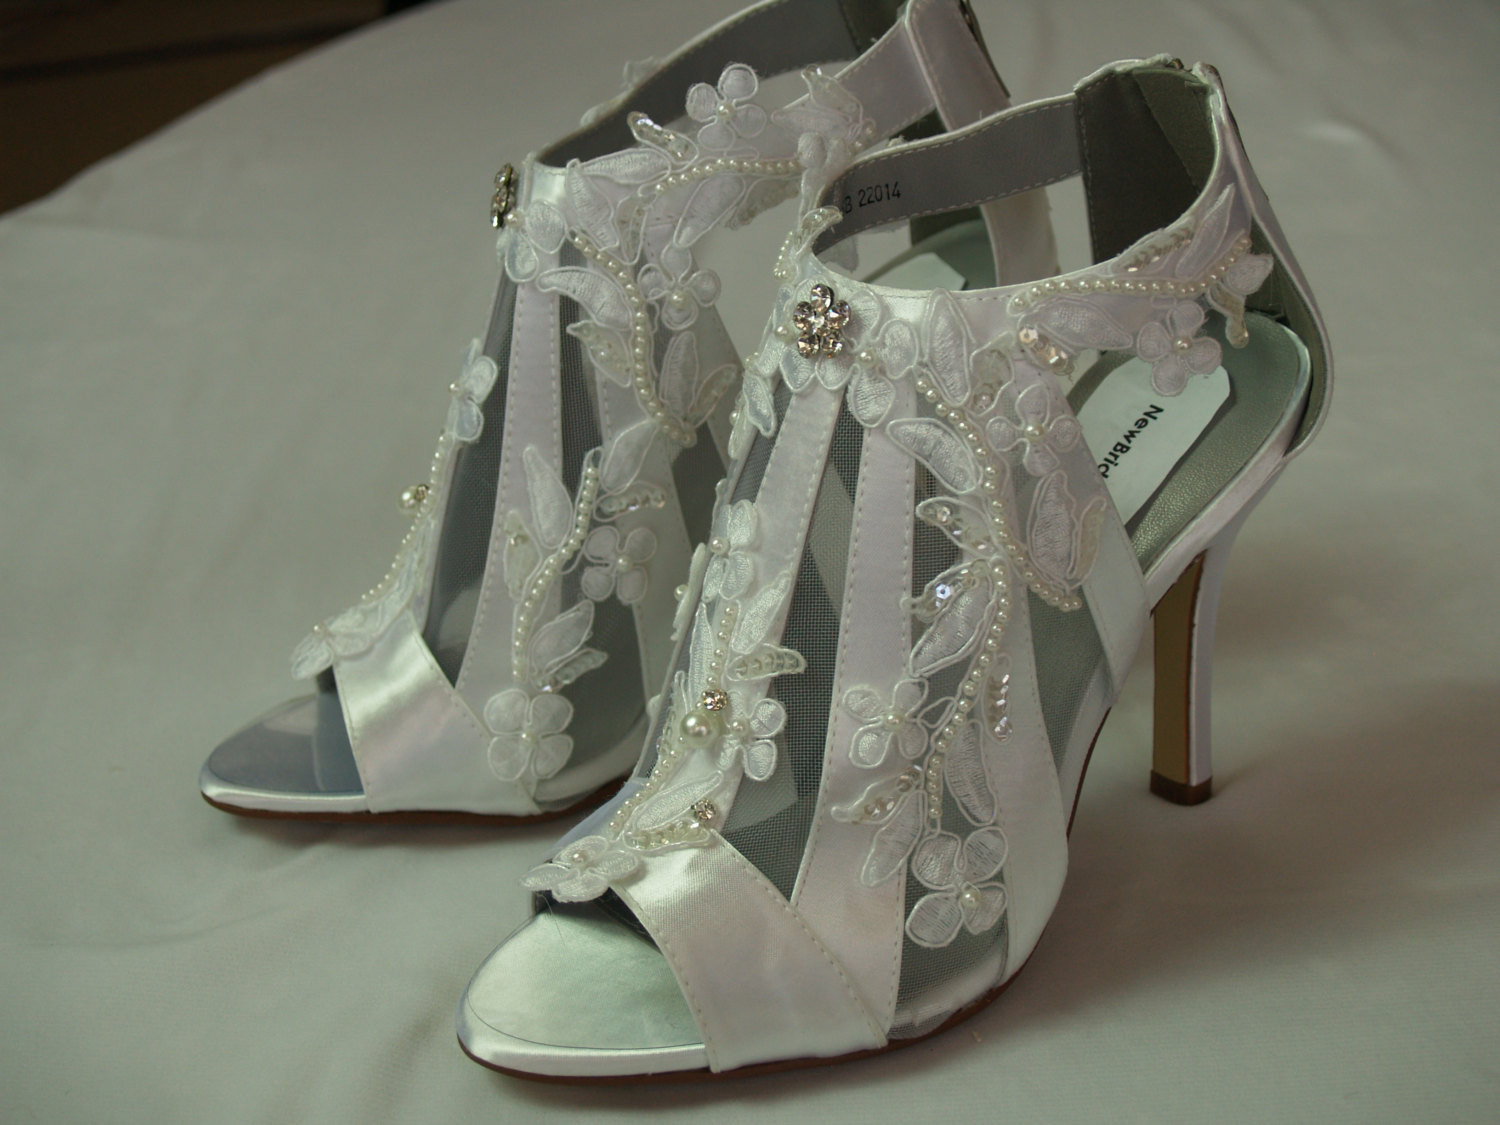 Victorian Wedding Shoes
 Victorian Wedding Boots Modern Shoes high heels lace appliqué